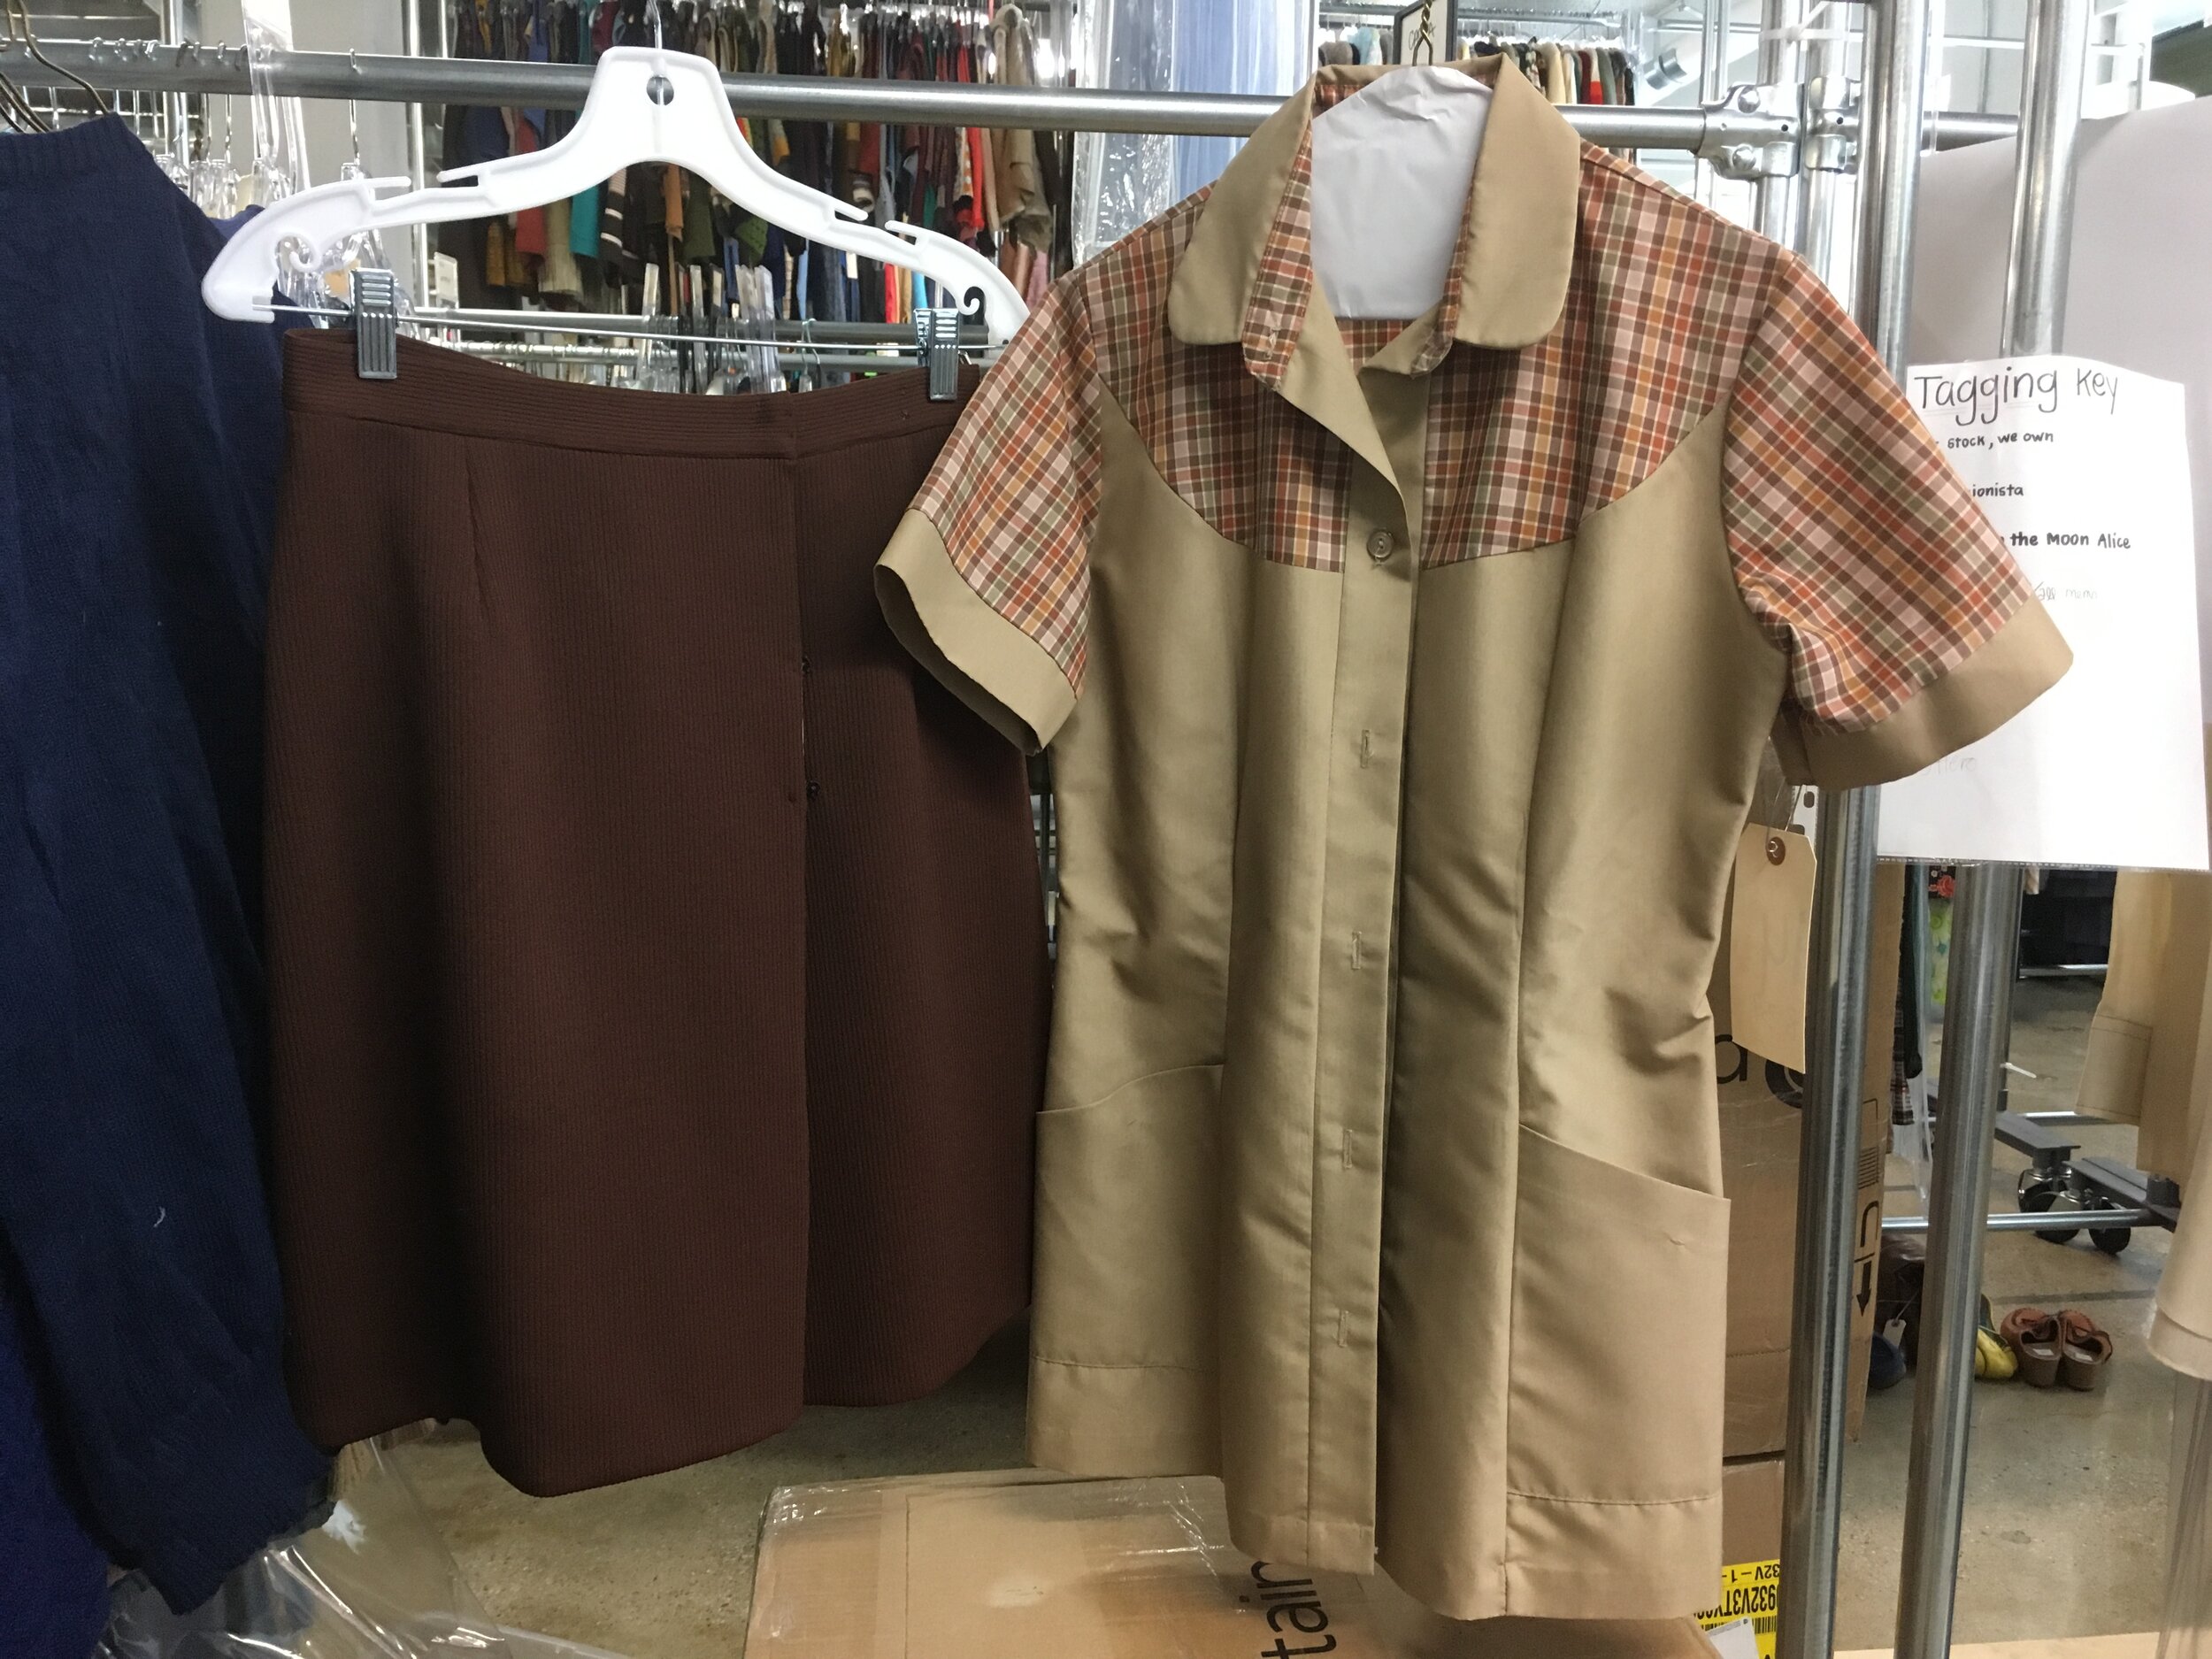 Sourcing uniforms for "Stuckey's," S1